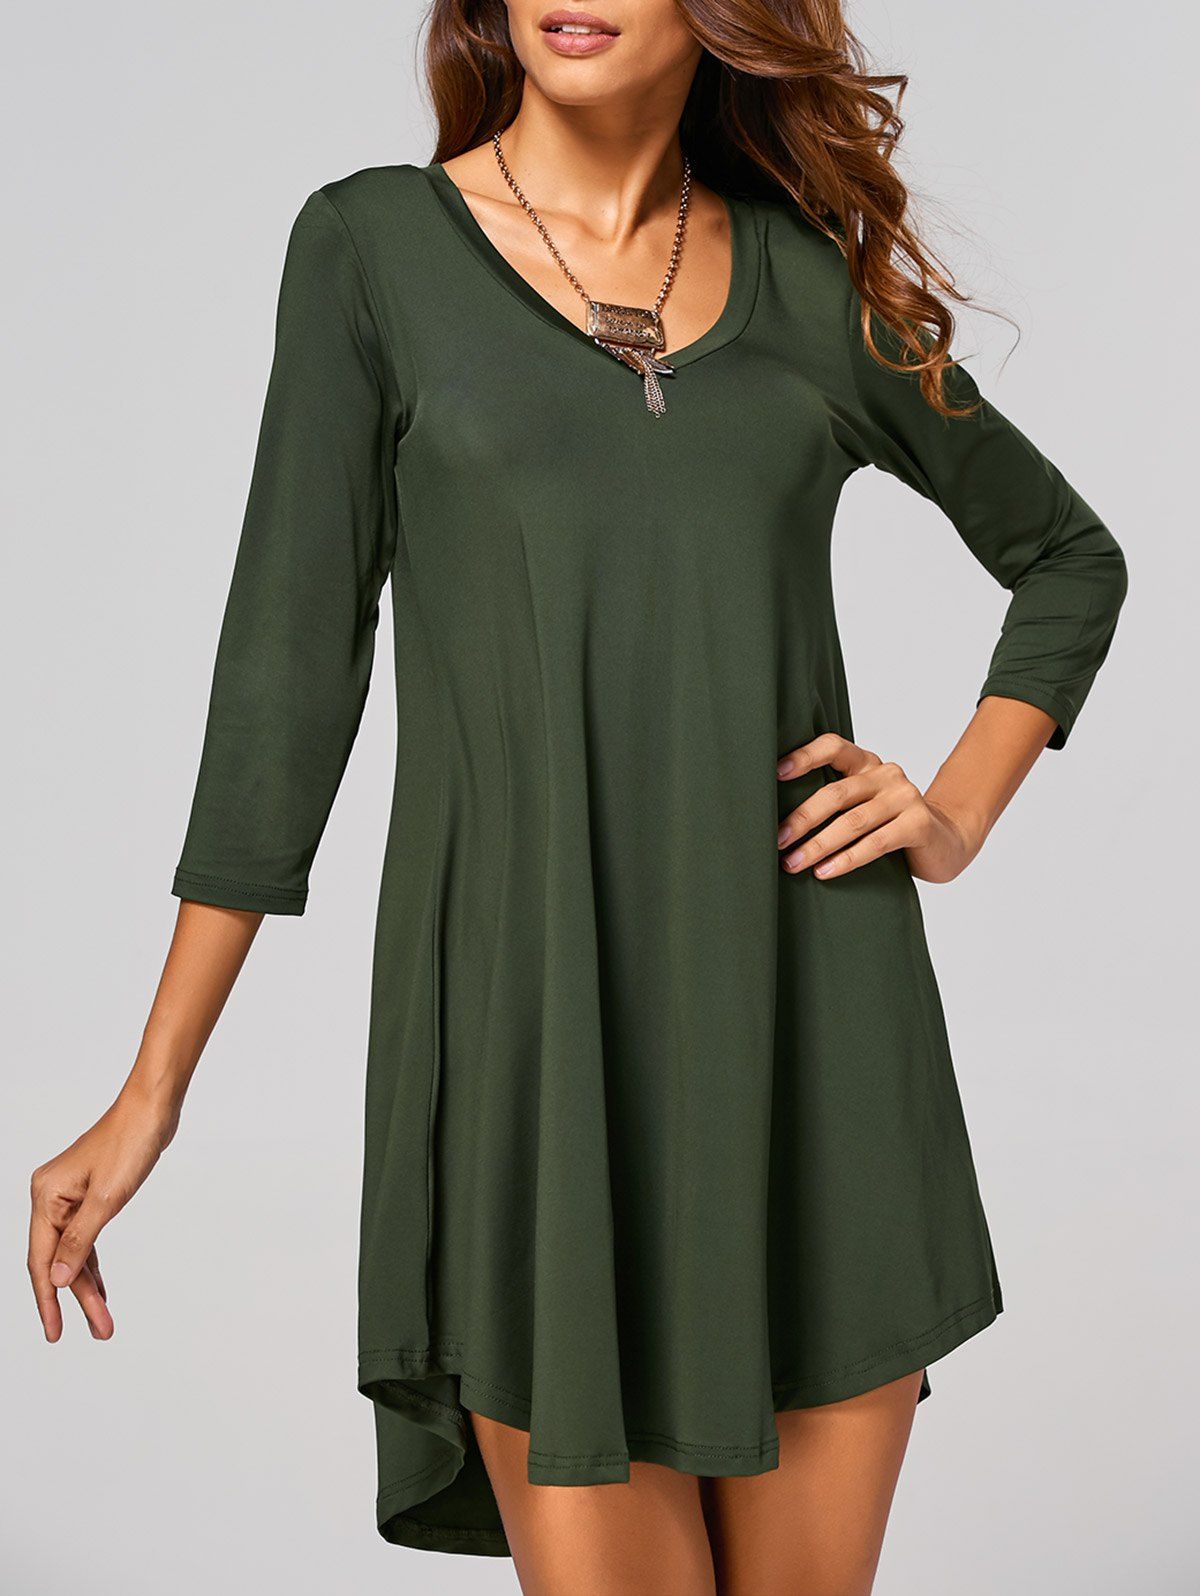 [41% OFF] 2021 V-Neck Asymmetrical Casual Day Dress Fall In ARMY GREEN ...